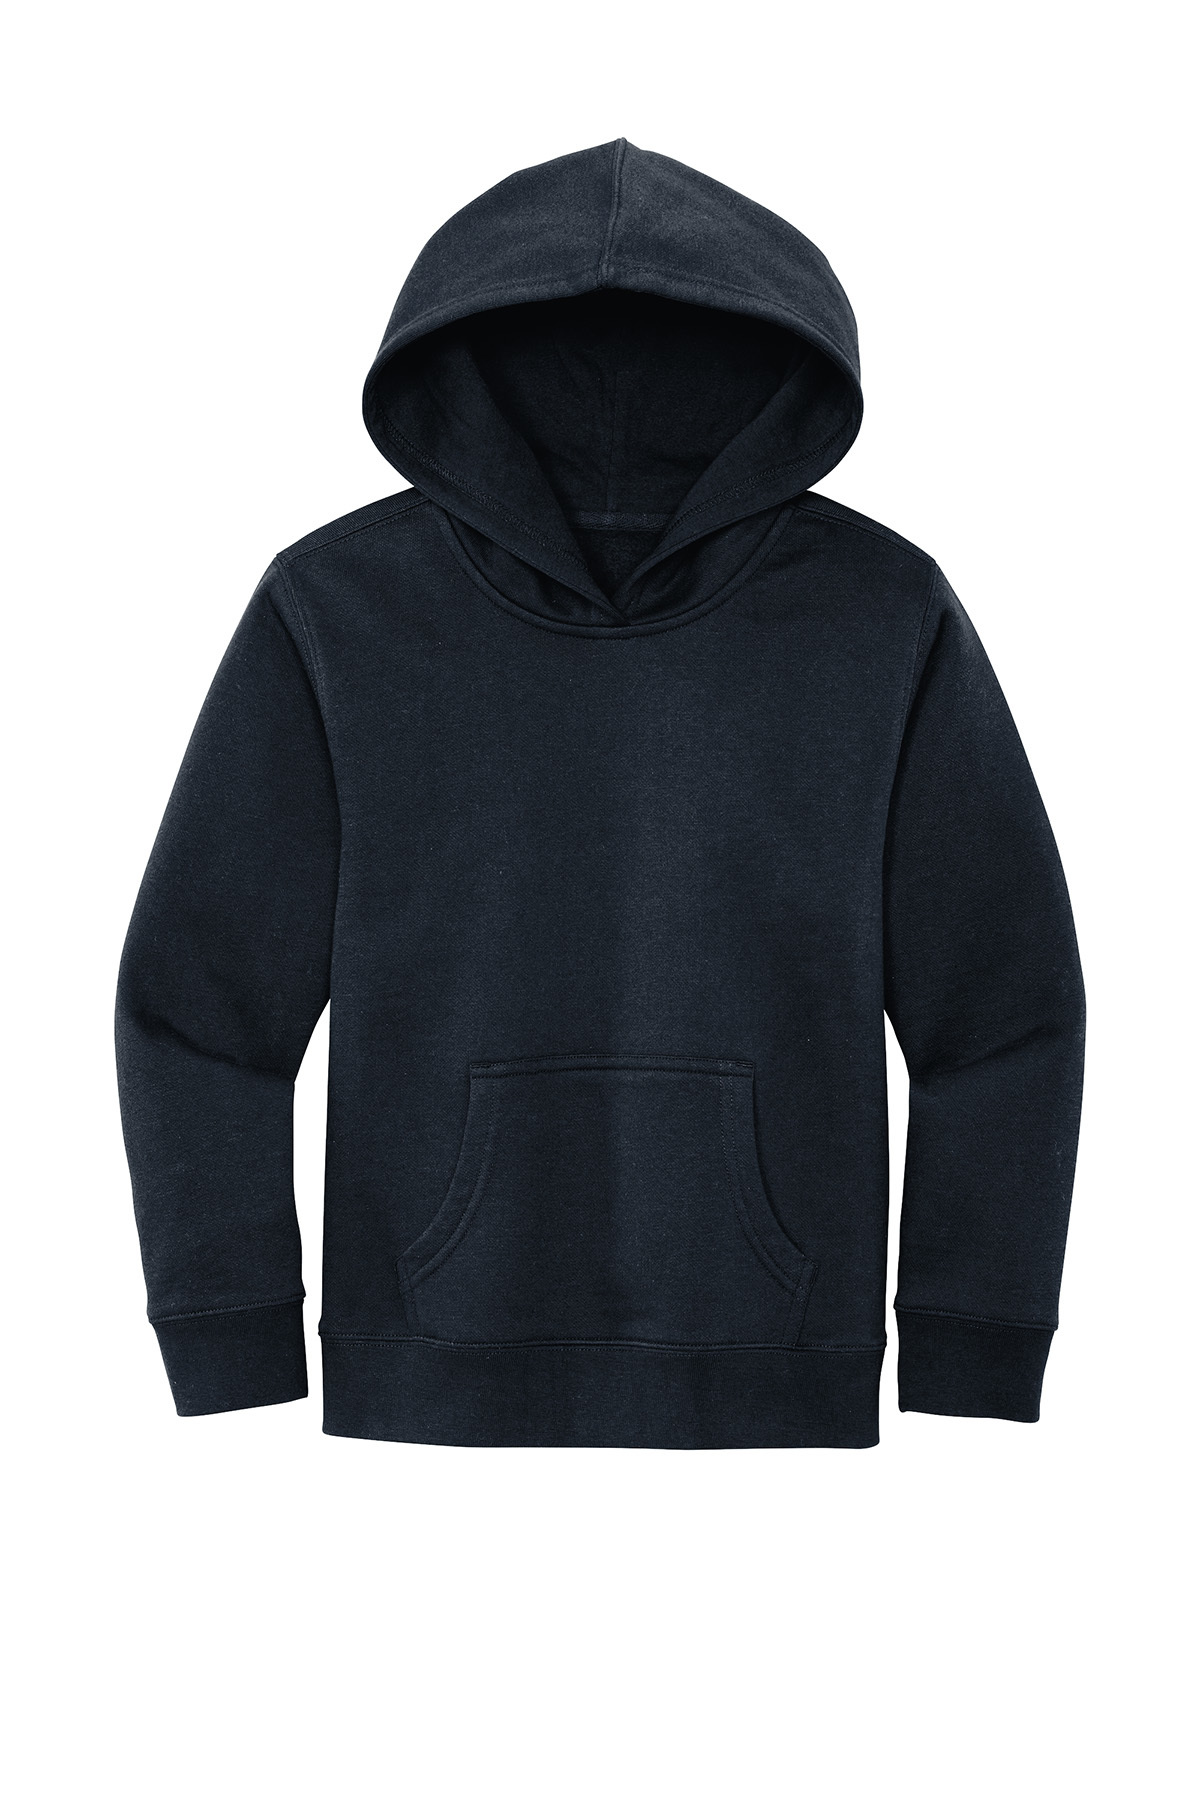 District Youth V.I.T. Fleece Hoodie | Product | District